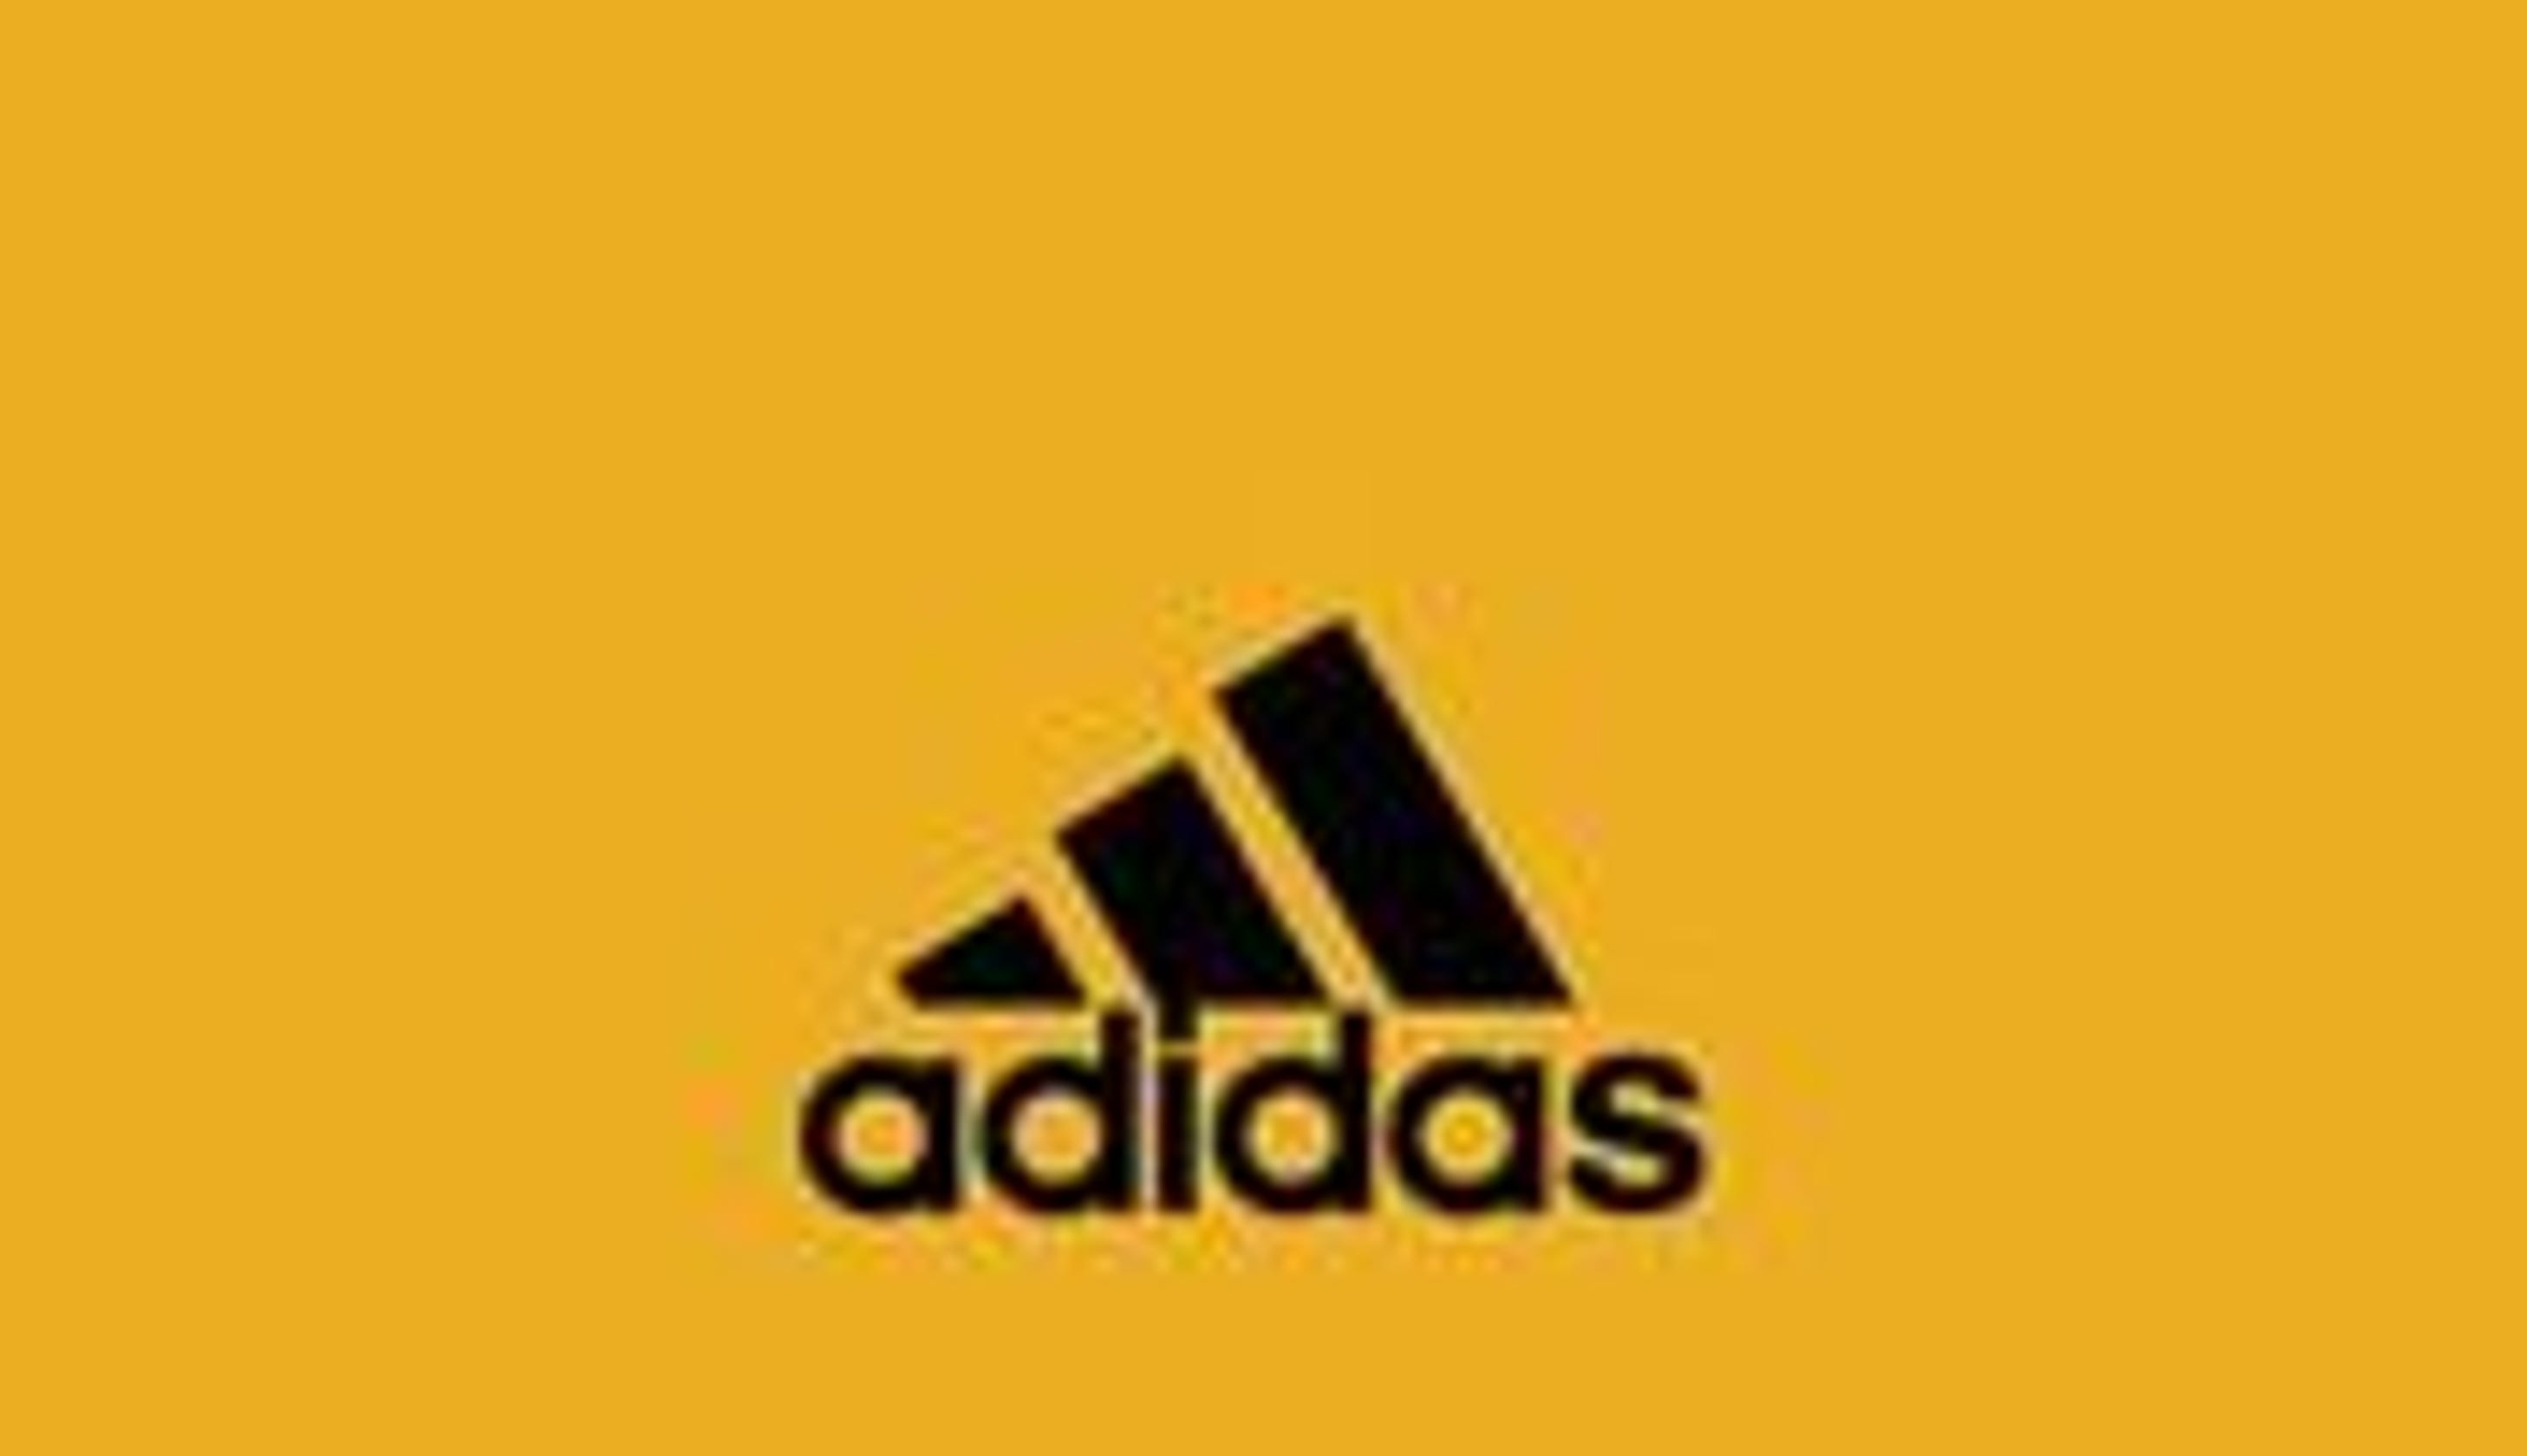 Beyonce teams up with Adidas to create shoes, clothing and Ivy Park